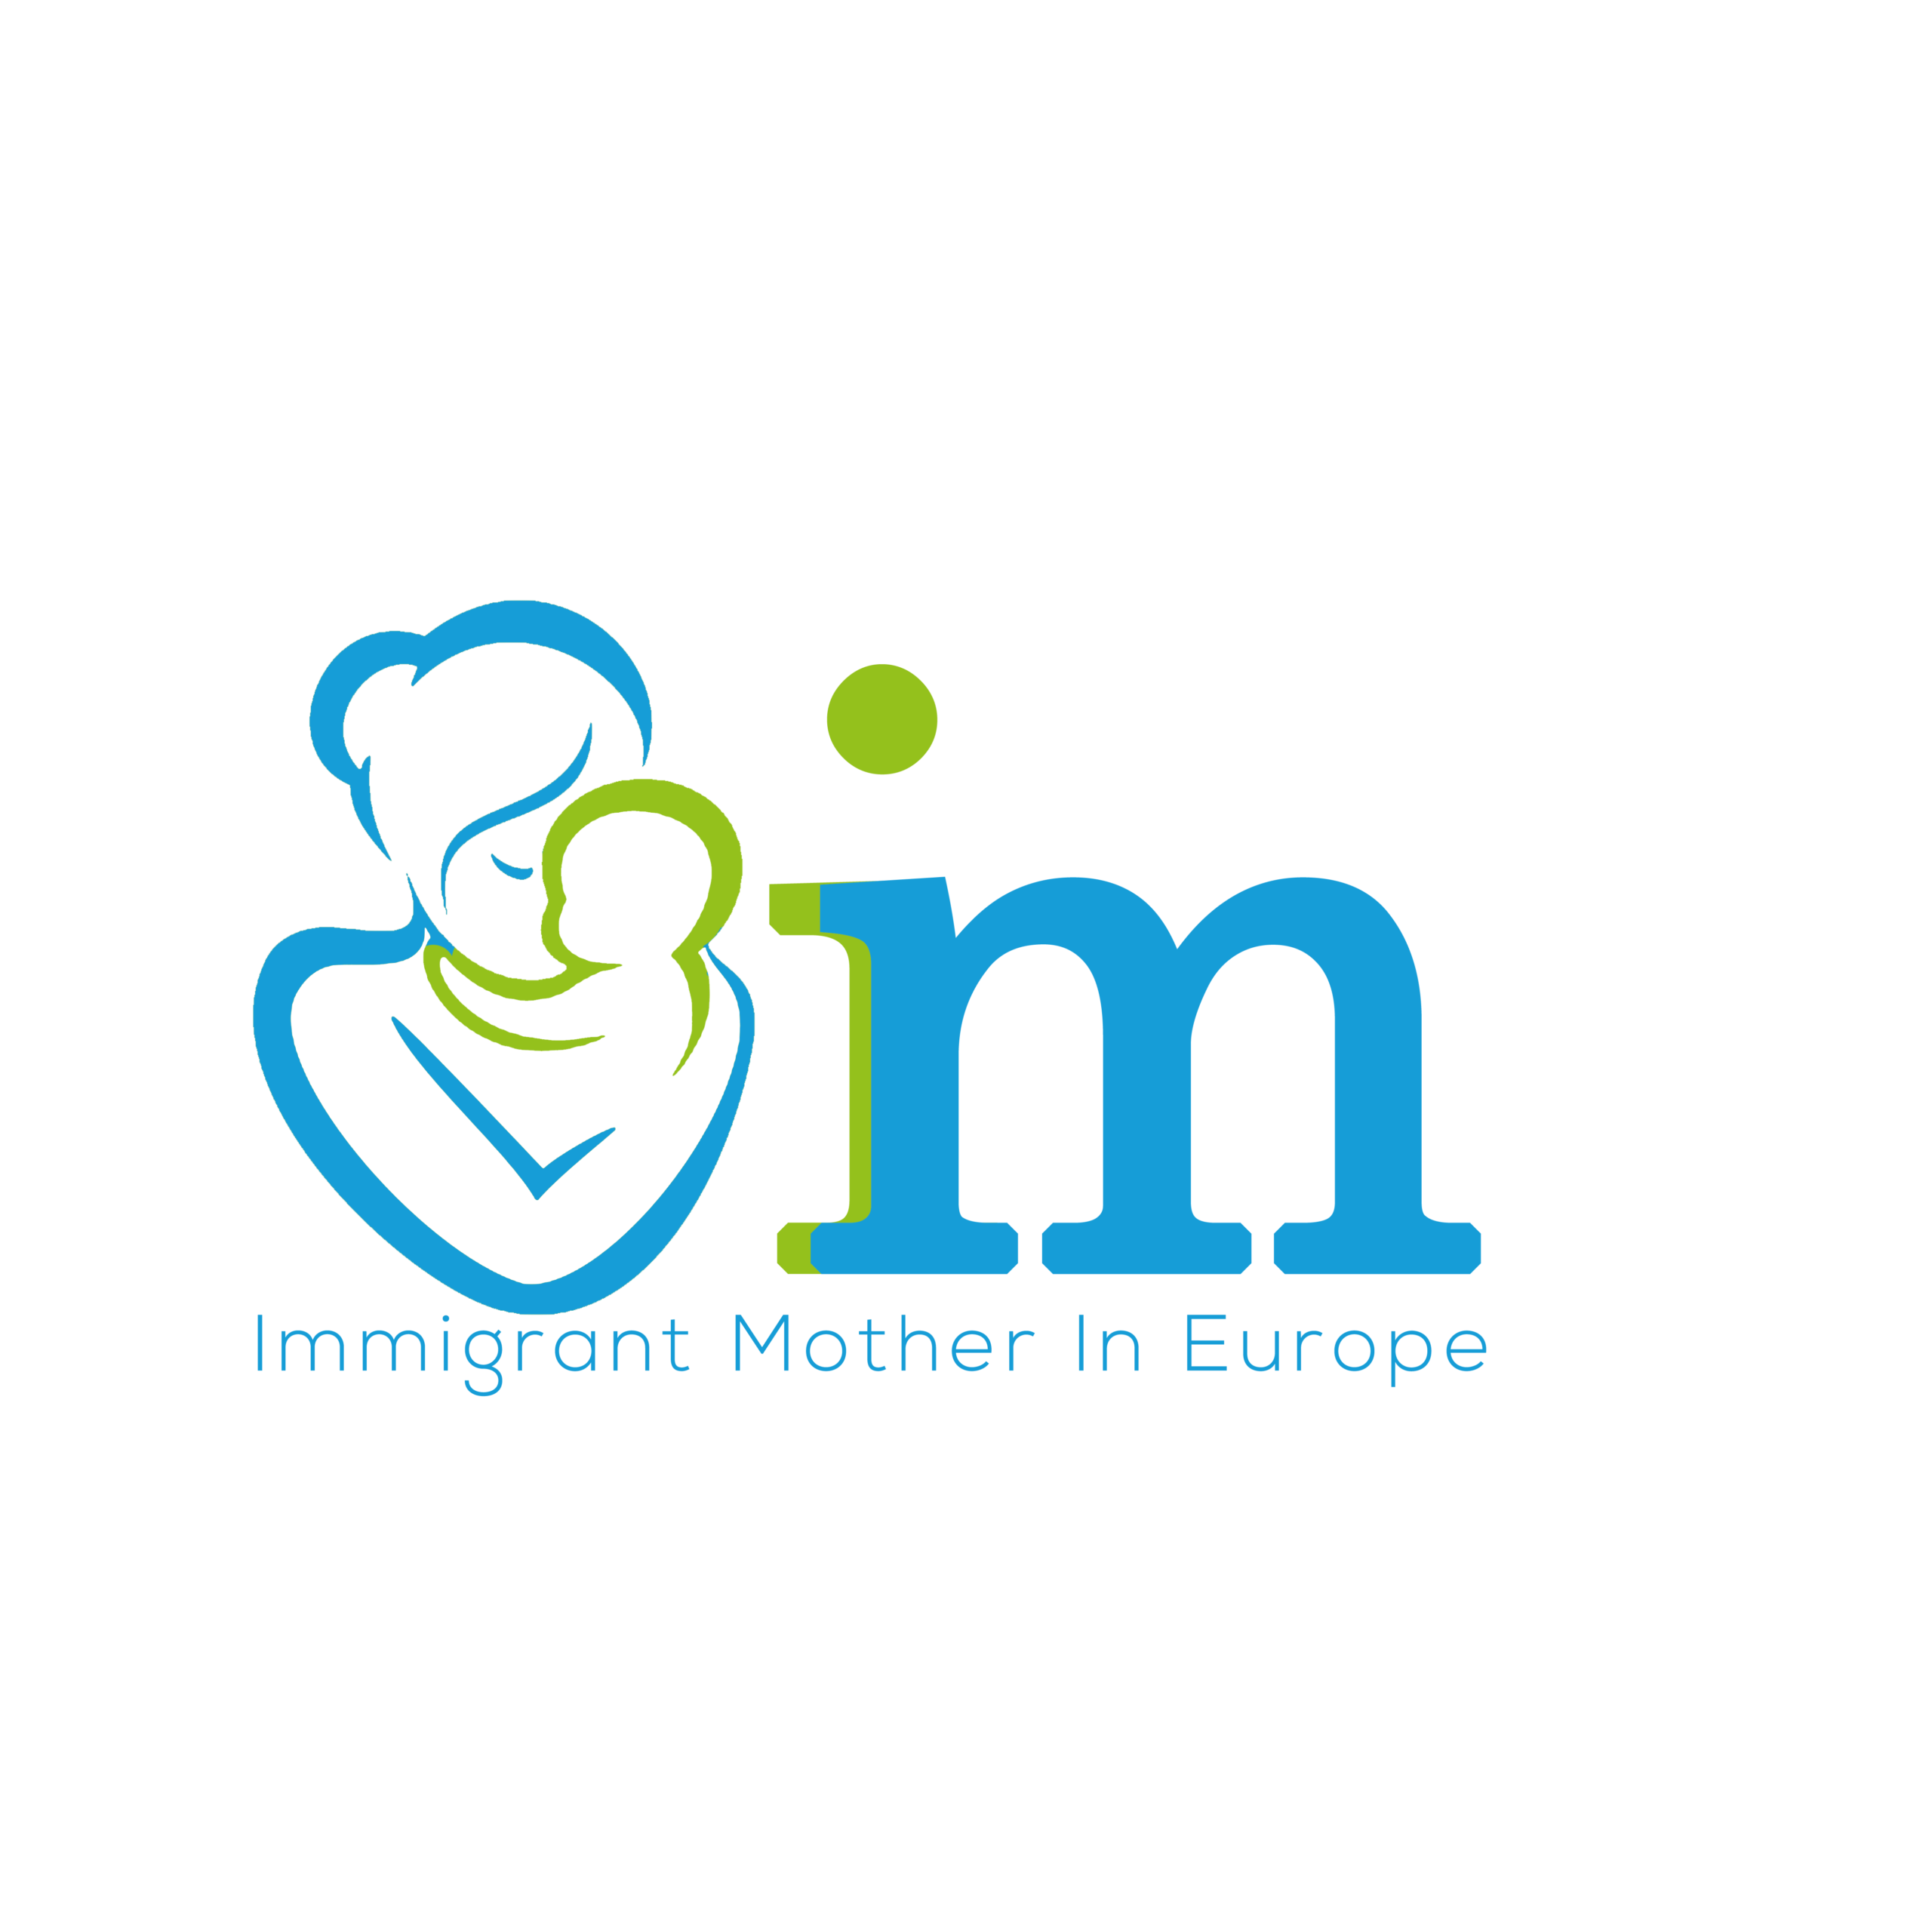 IMMIGRANT MOTHER IN EUROPE